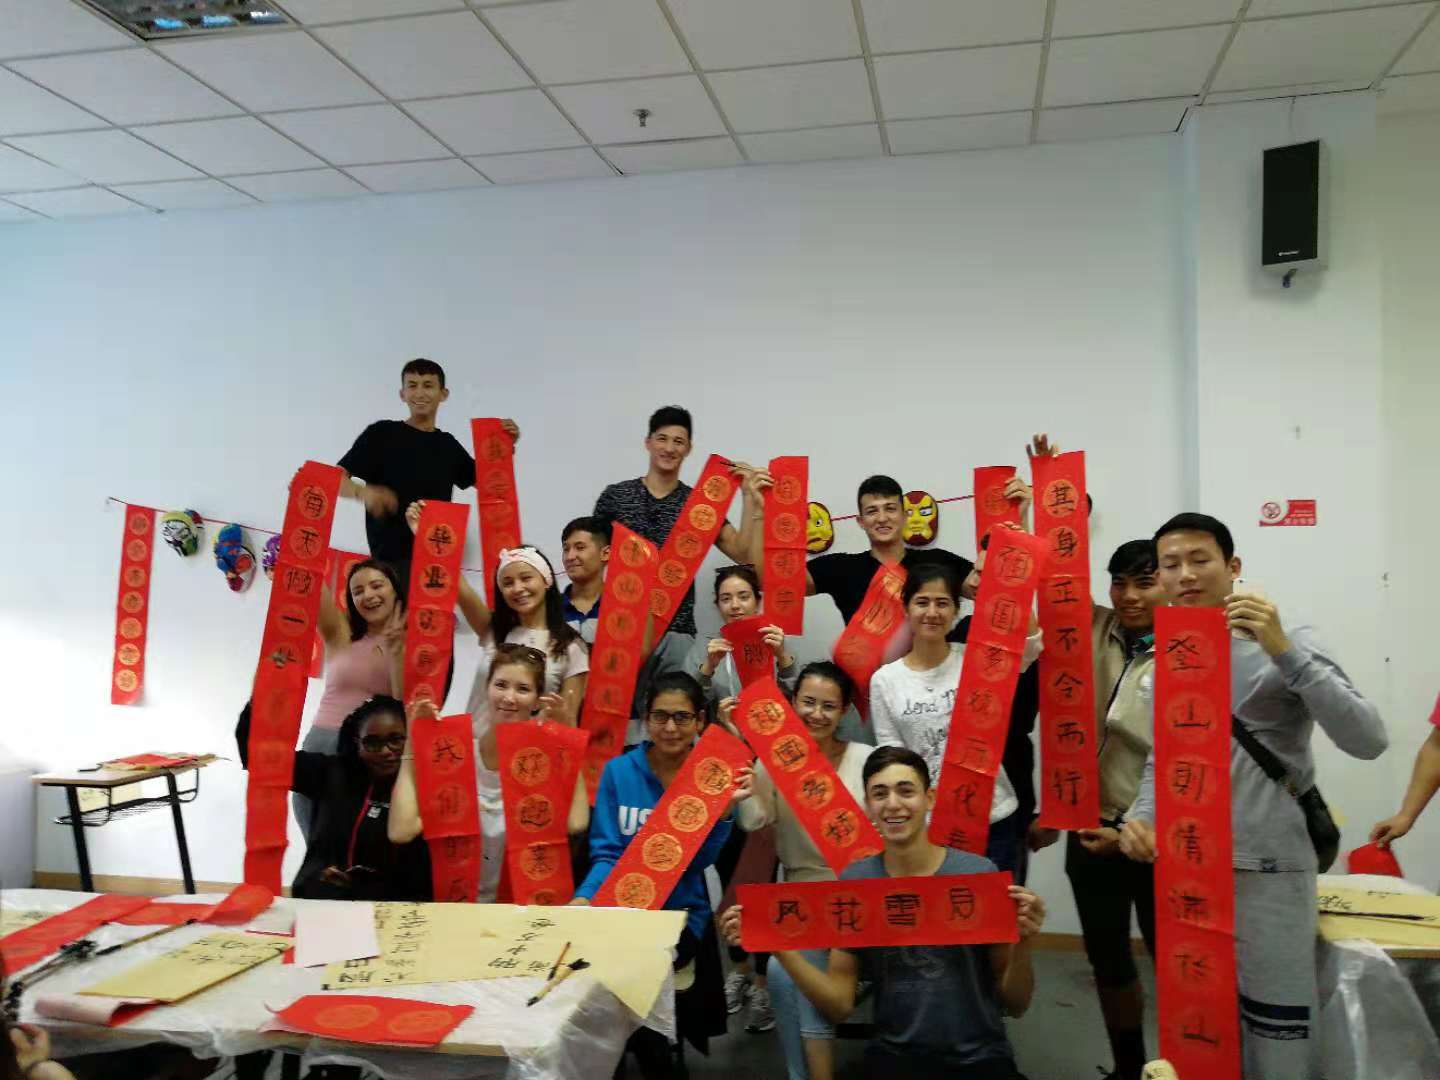 Factory Supply Heads Industrial Online Inkjet - Part time Group Course2 – Mandarin Moring detail pictures